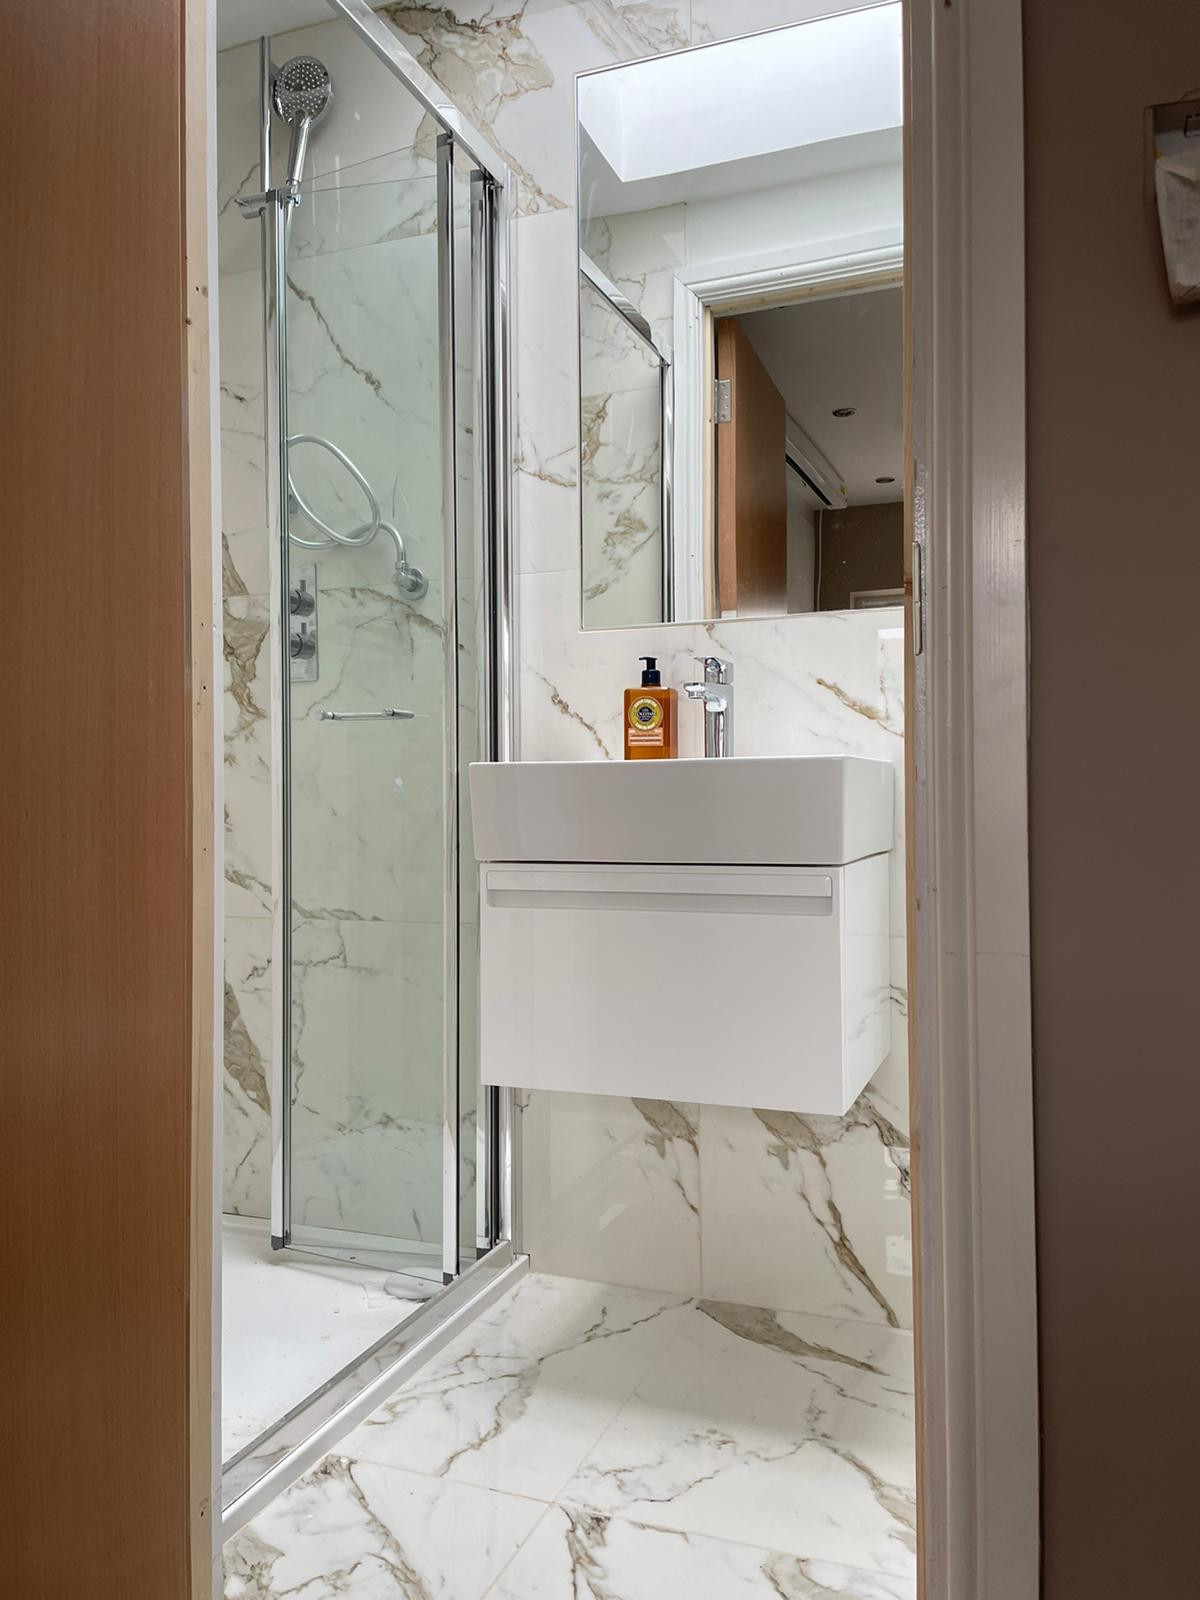 A compact vanity unit can help you to get everything neat and tidy even if the bathroom is quite small. A big bespoke mirror will make the difference for this kind of space.